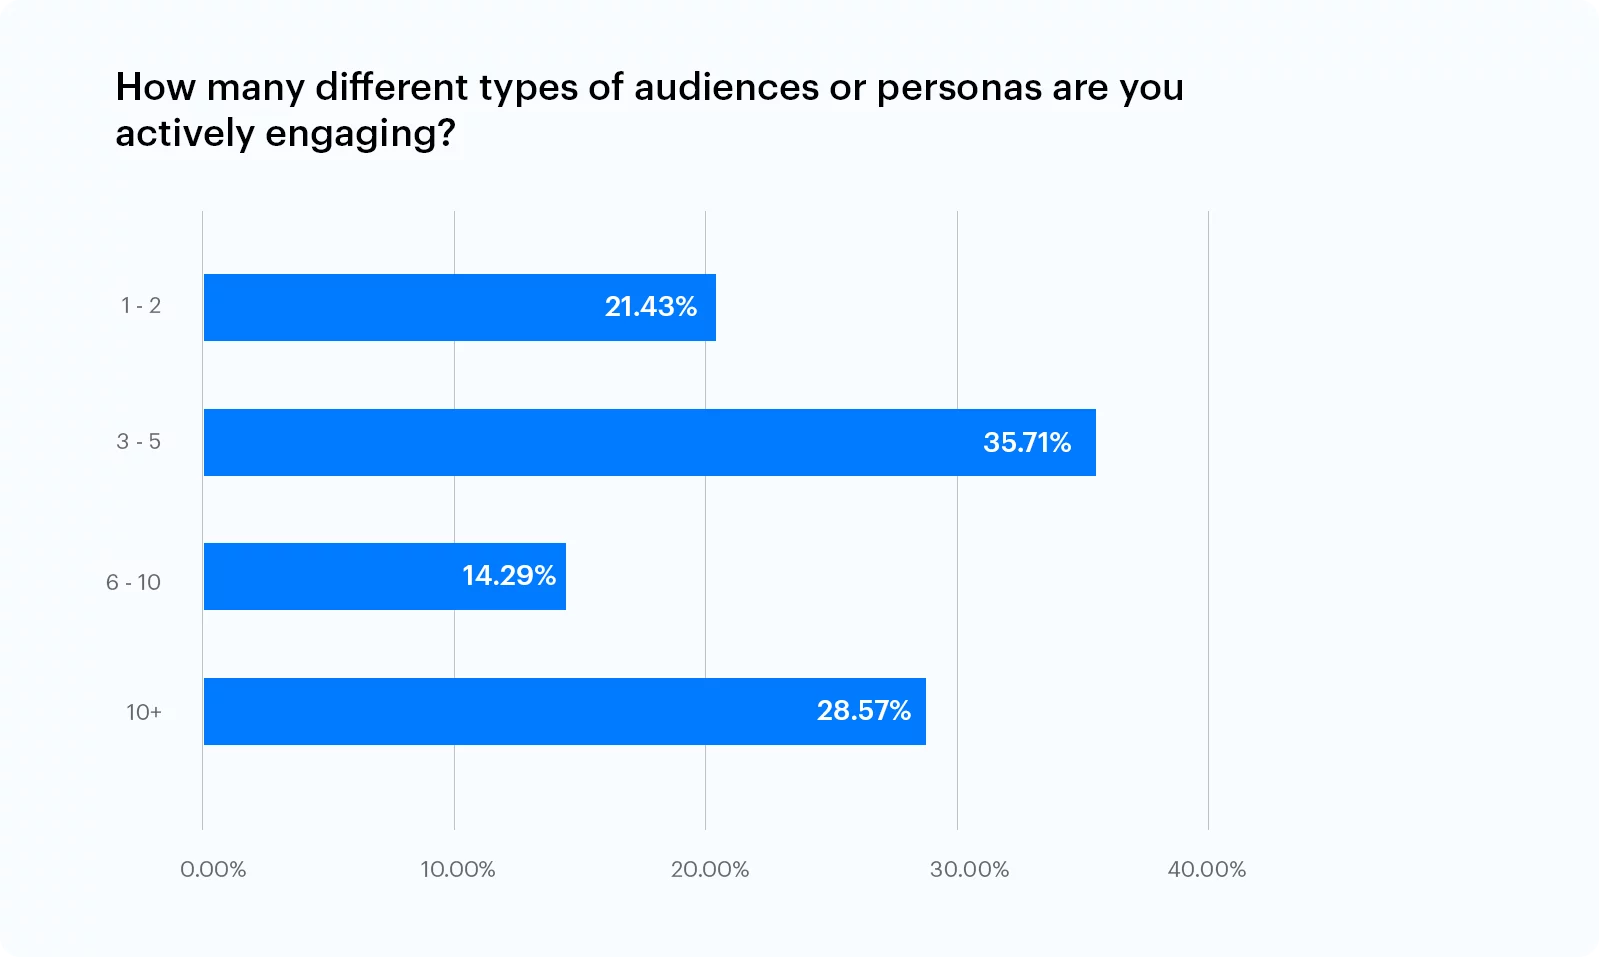 How many different types of audiences aor personas are you actively engaging?